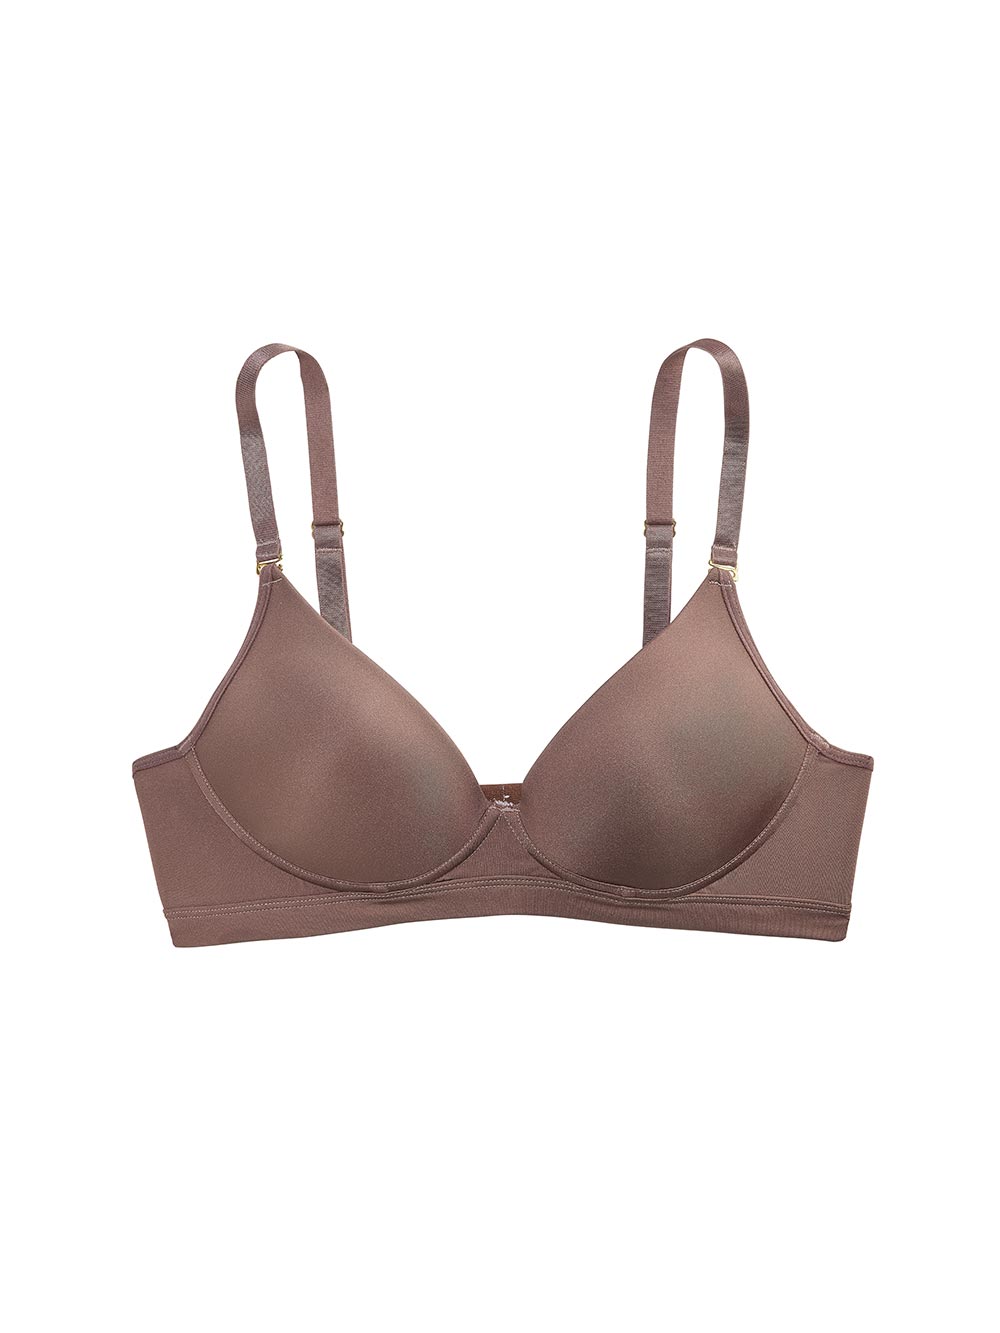 Gina Wire-free Bra, Petite, Smooth Cup, Light Push-Up, Wide Band